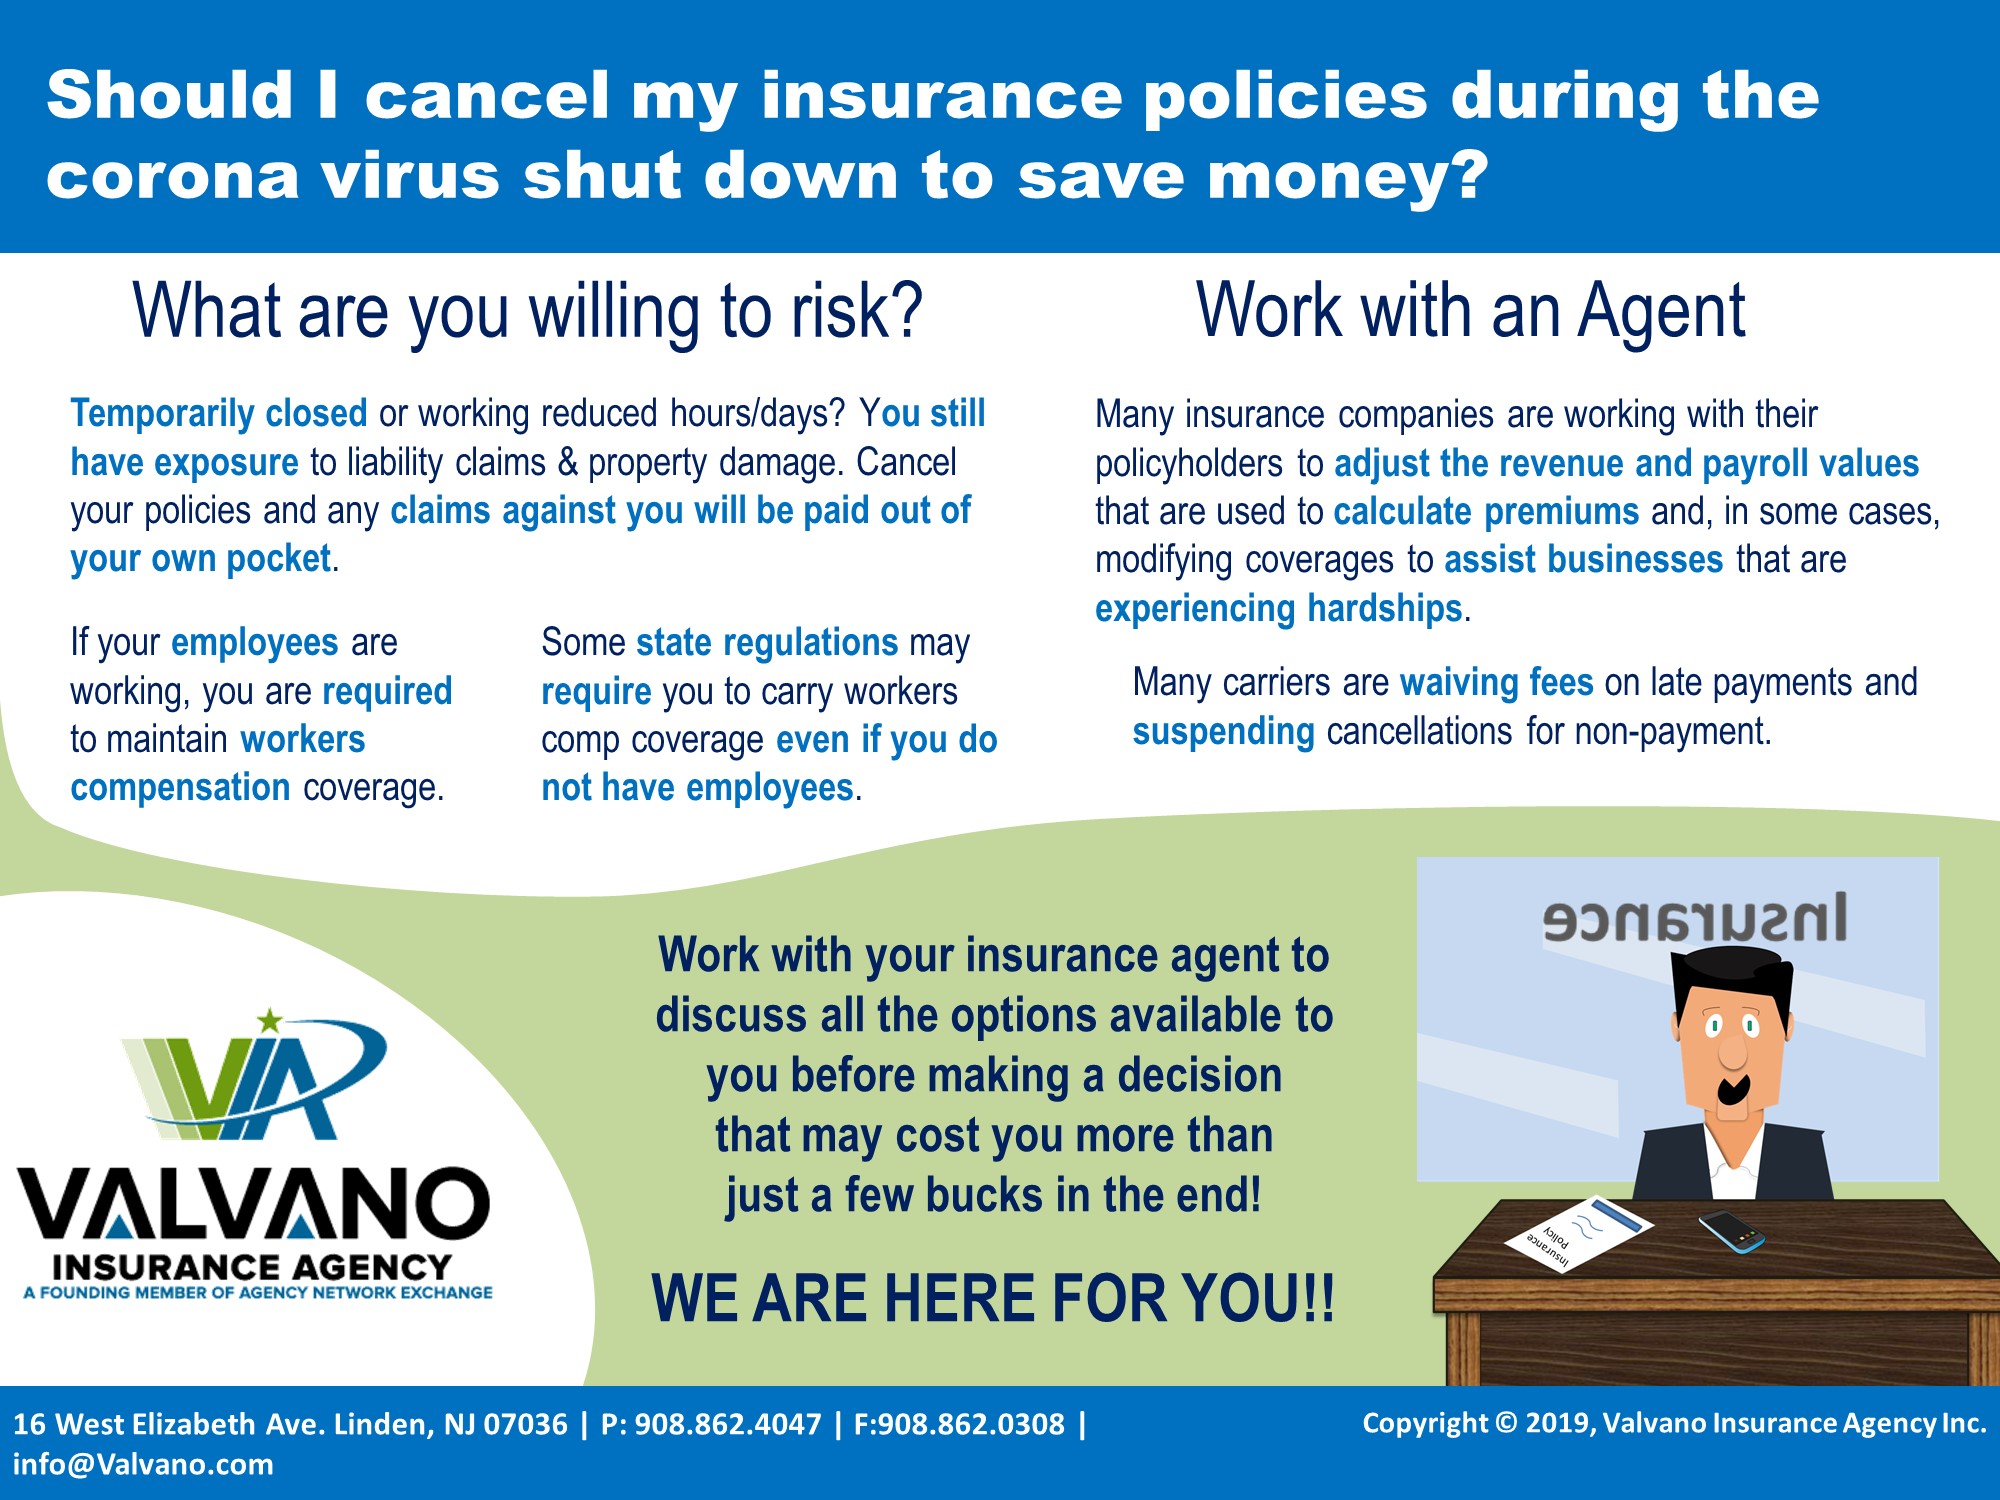 Reasons to Keep Insurance Coverage